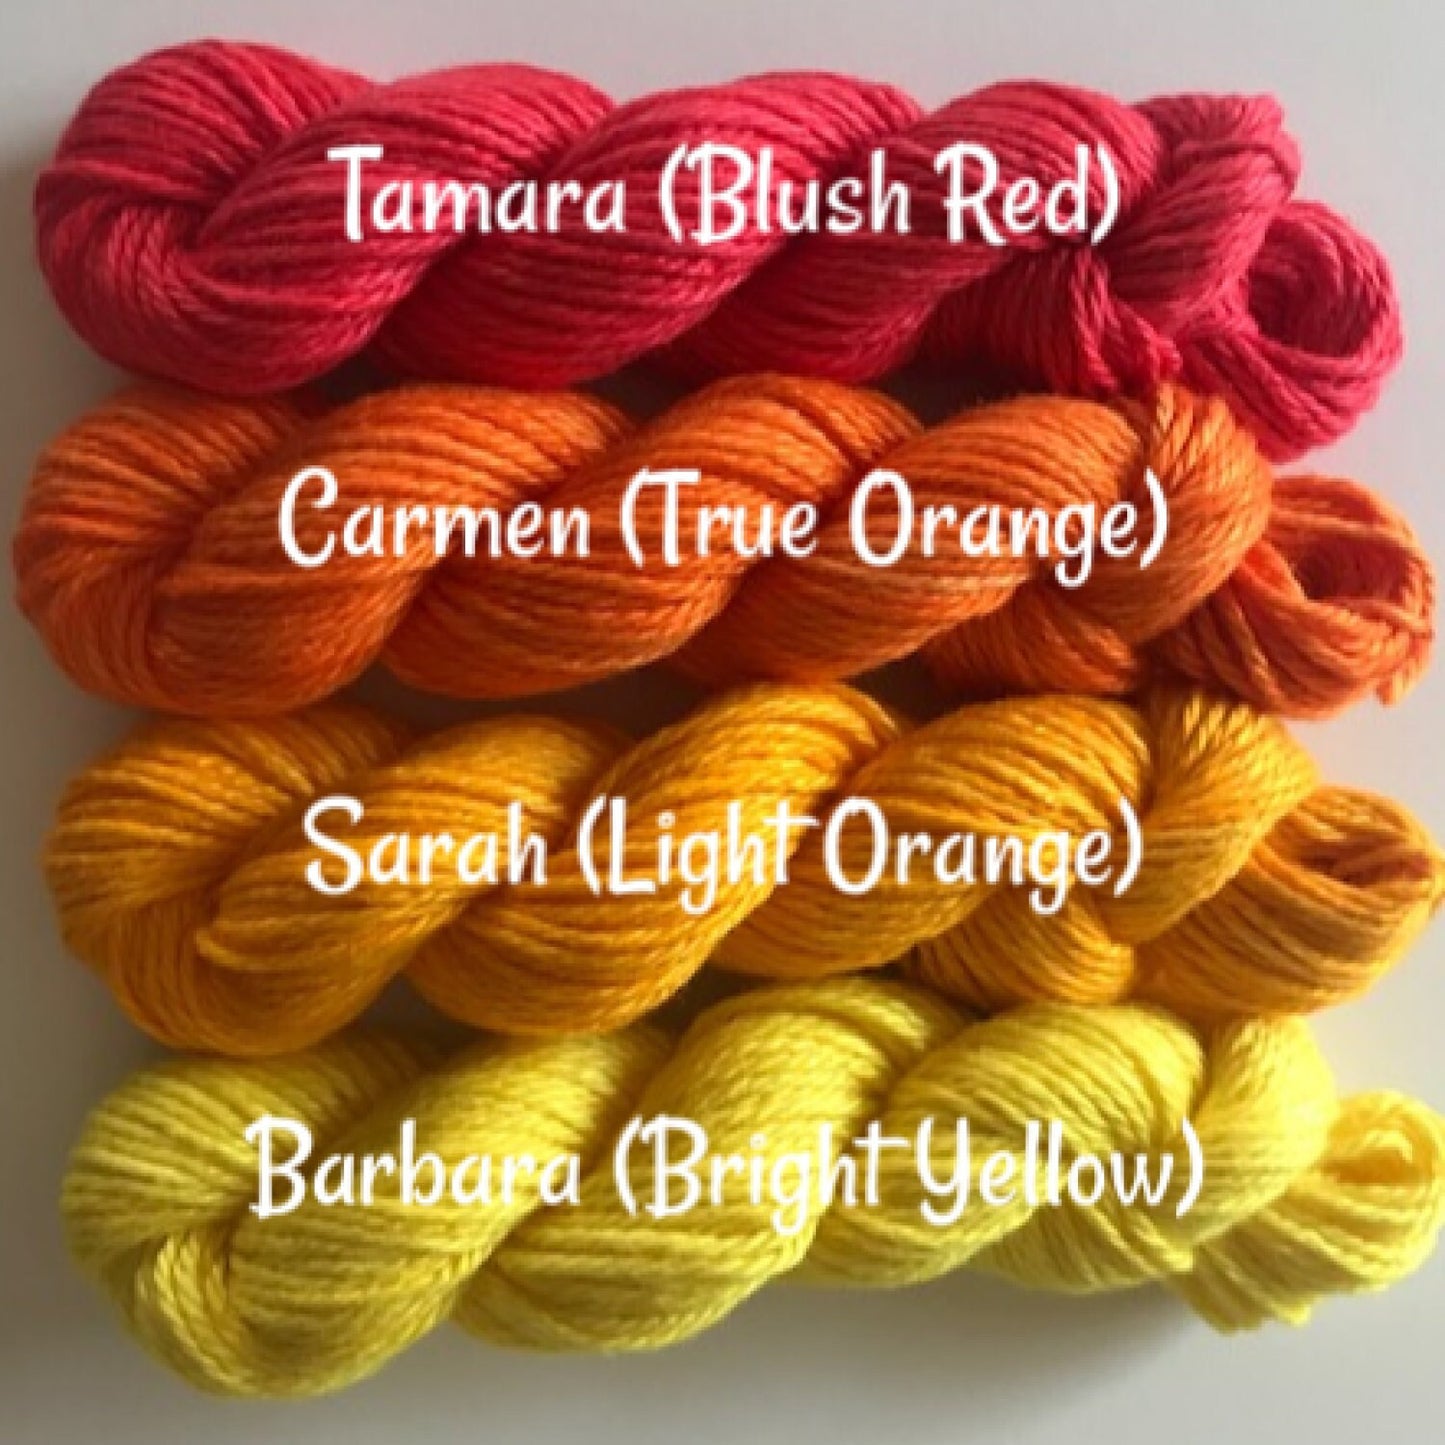 Vegan Yarn Mini Skein Kit - Hand Dyed DK / Light Worsted Bamboo Cotton - (10) 53 yd Skeins in Bright Semi Solids - 3 Ply Ultra Soft Yarn